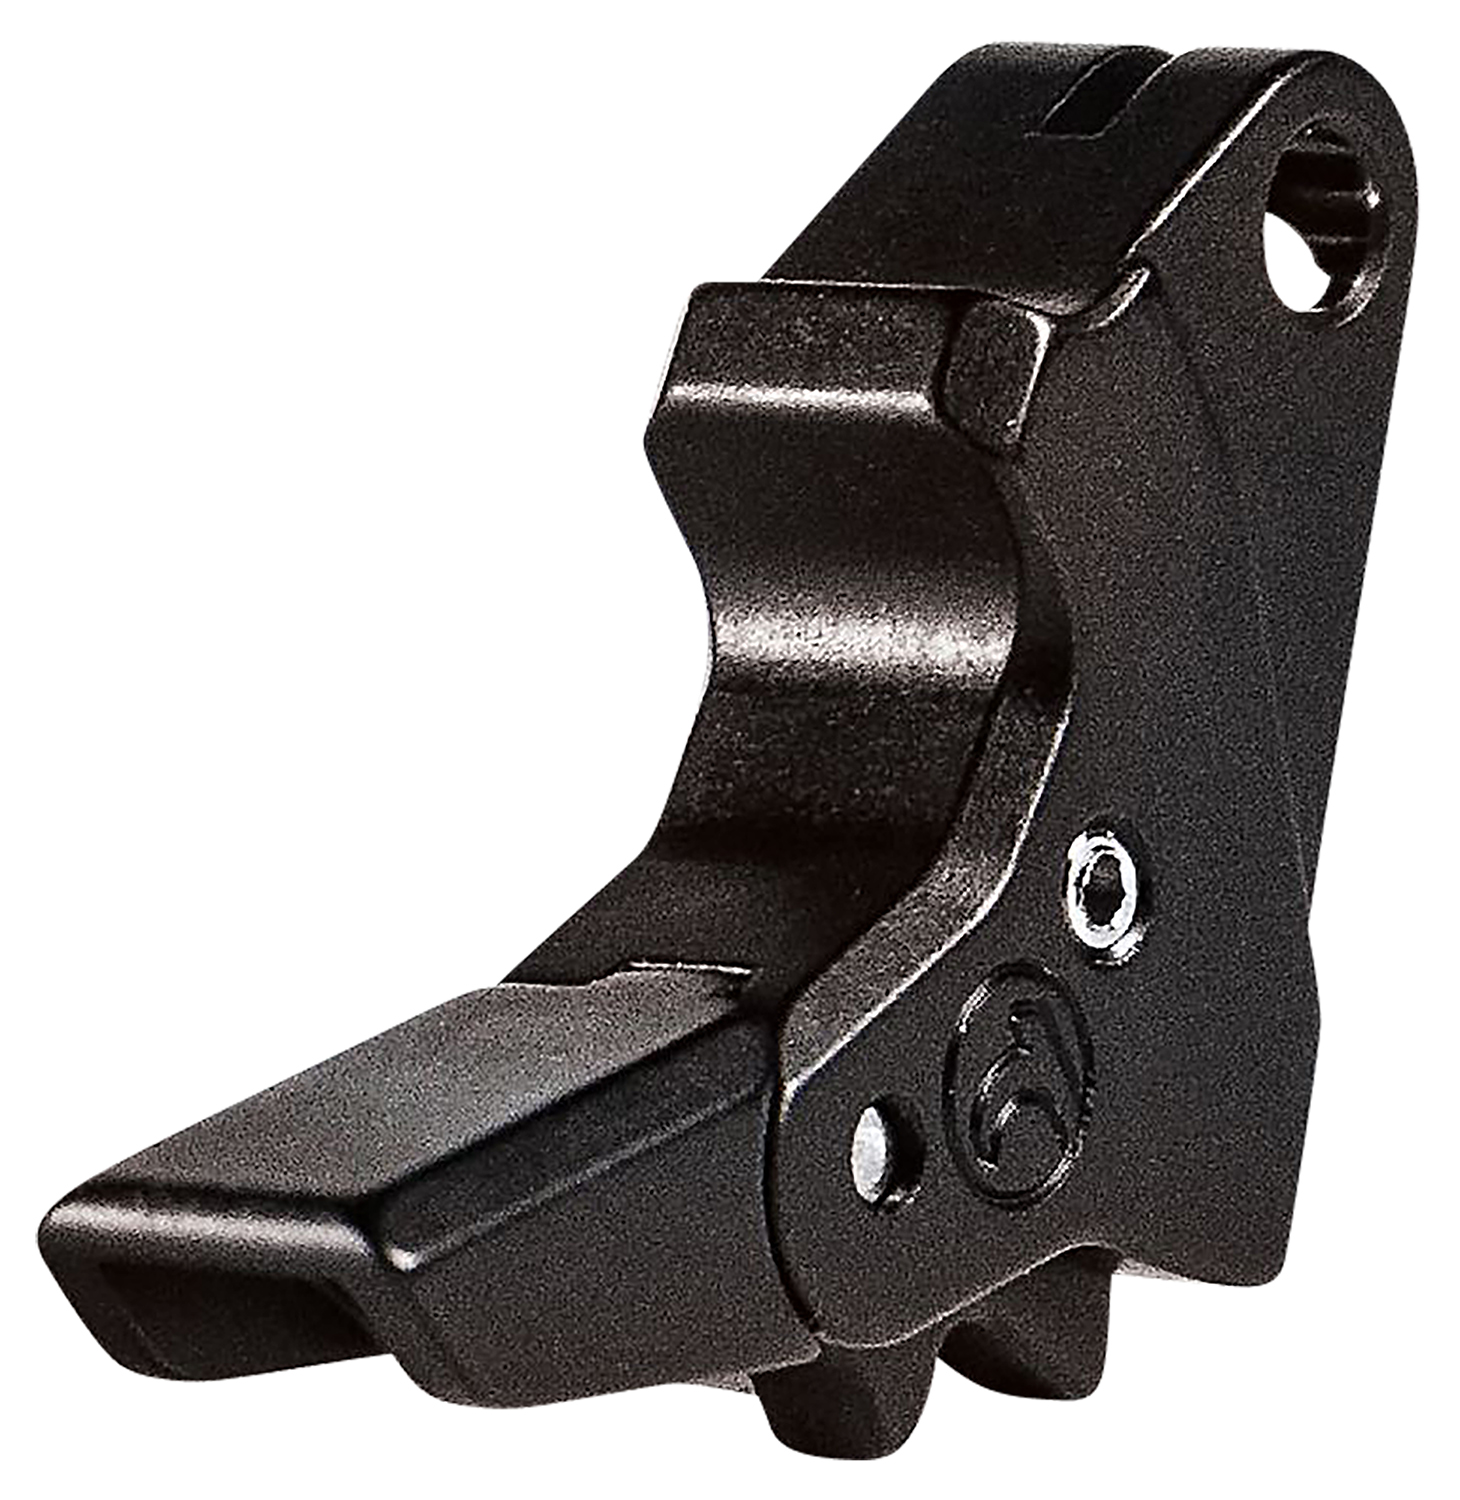 Timney Triggers ALPHASWMP Alpha Competition Straight Trigger with 3 lbs Draw Weight & Black Finish for S&W M&P 1.0, 2.0